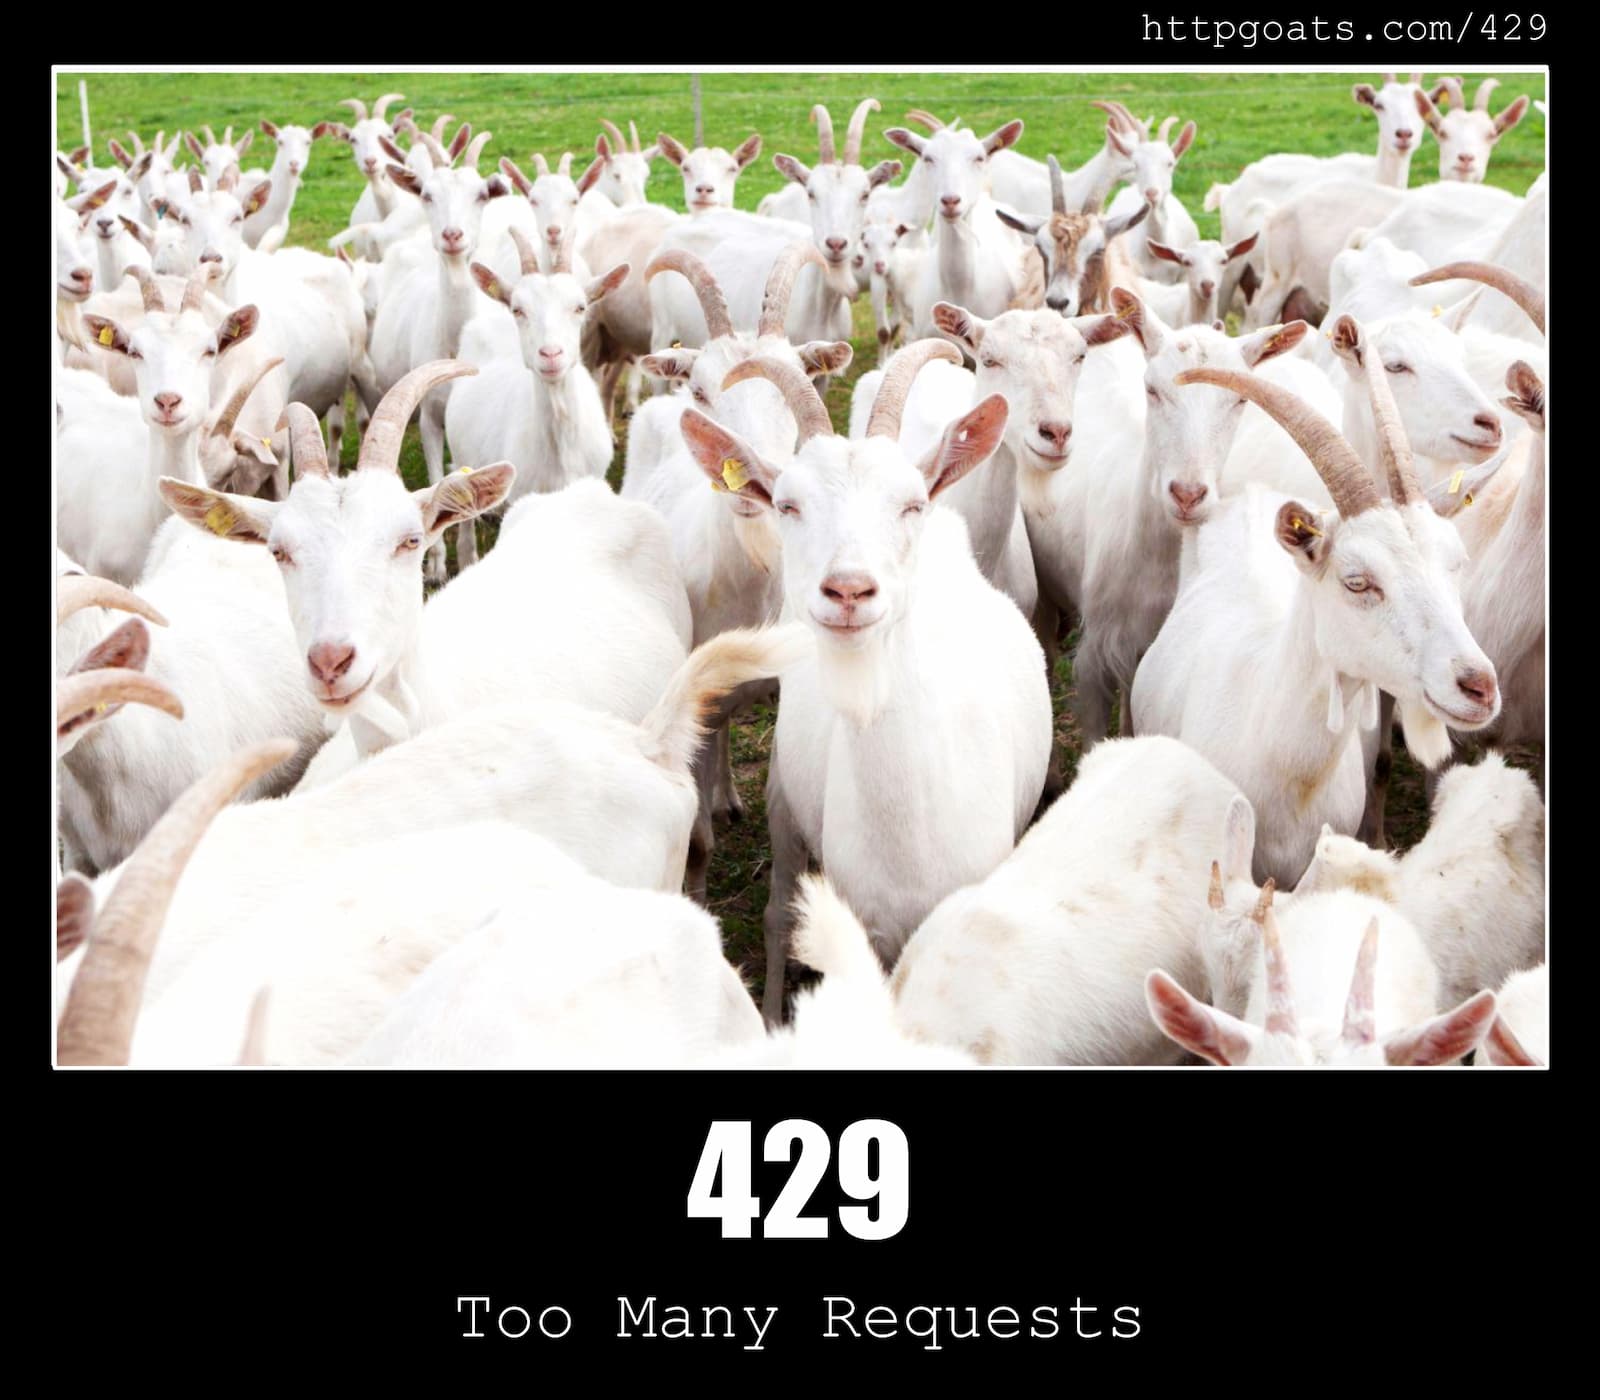 HTTP Status Code 429 Too Many Requests & Goats